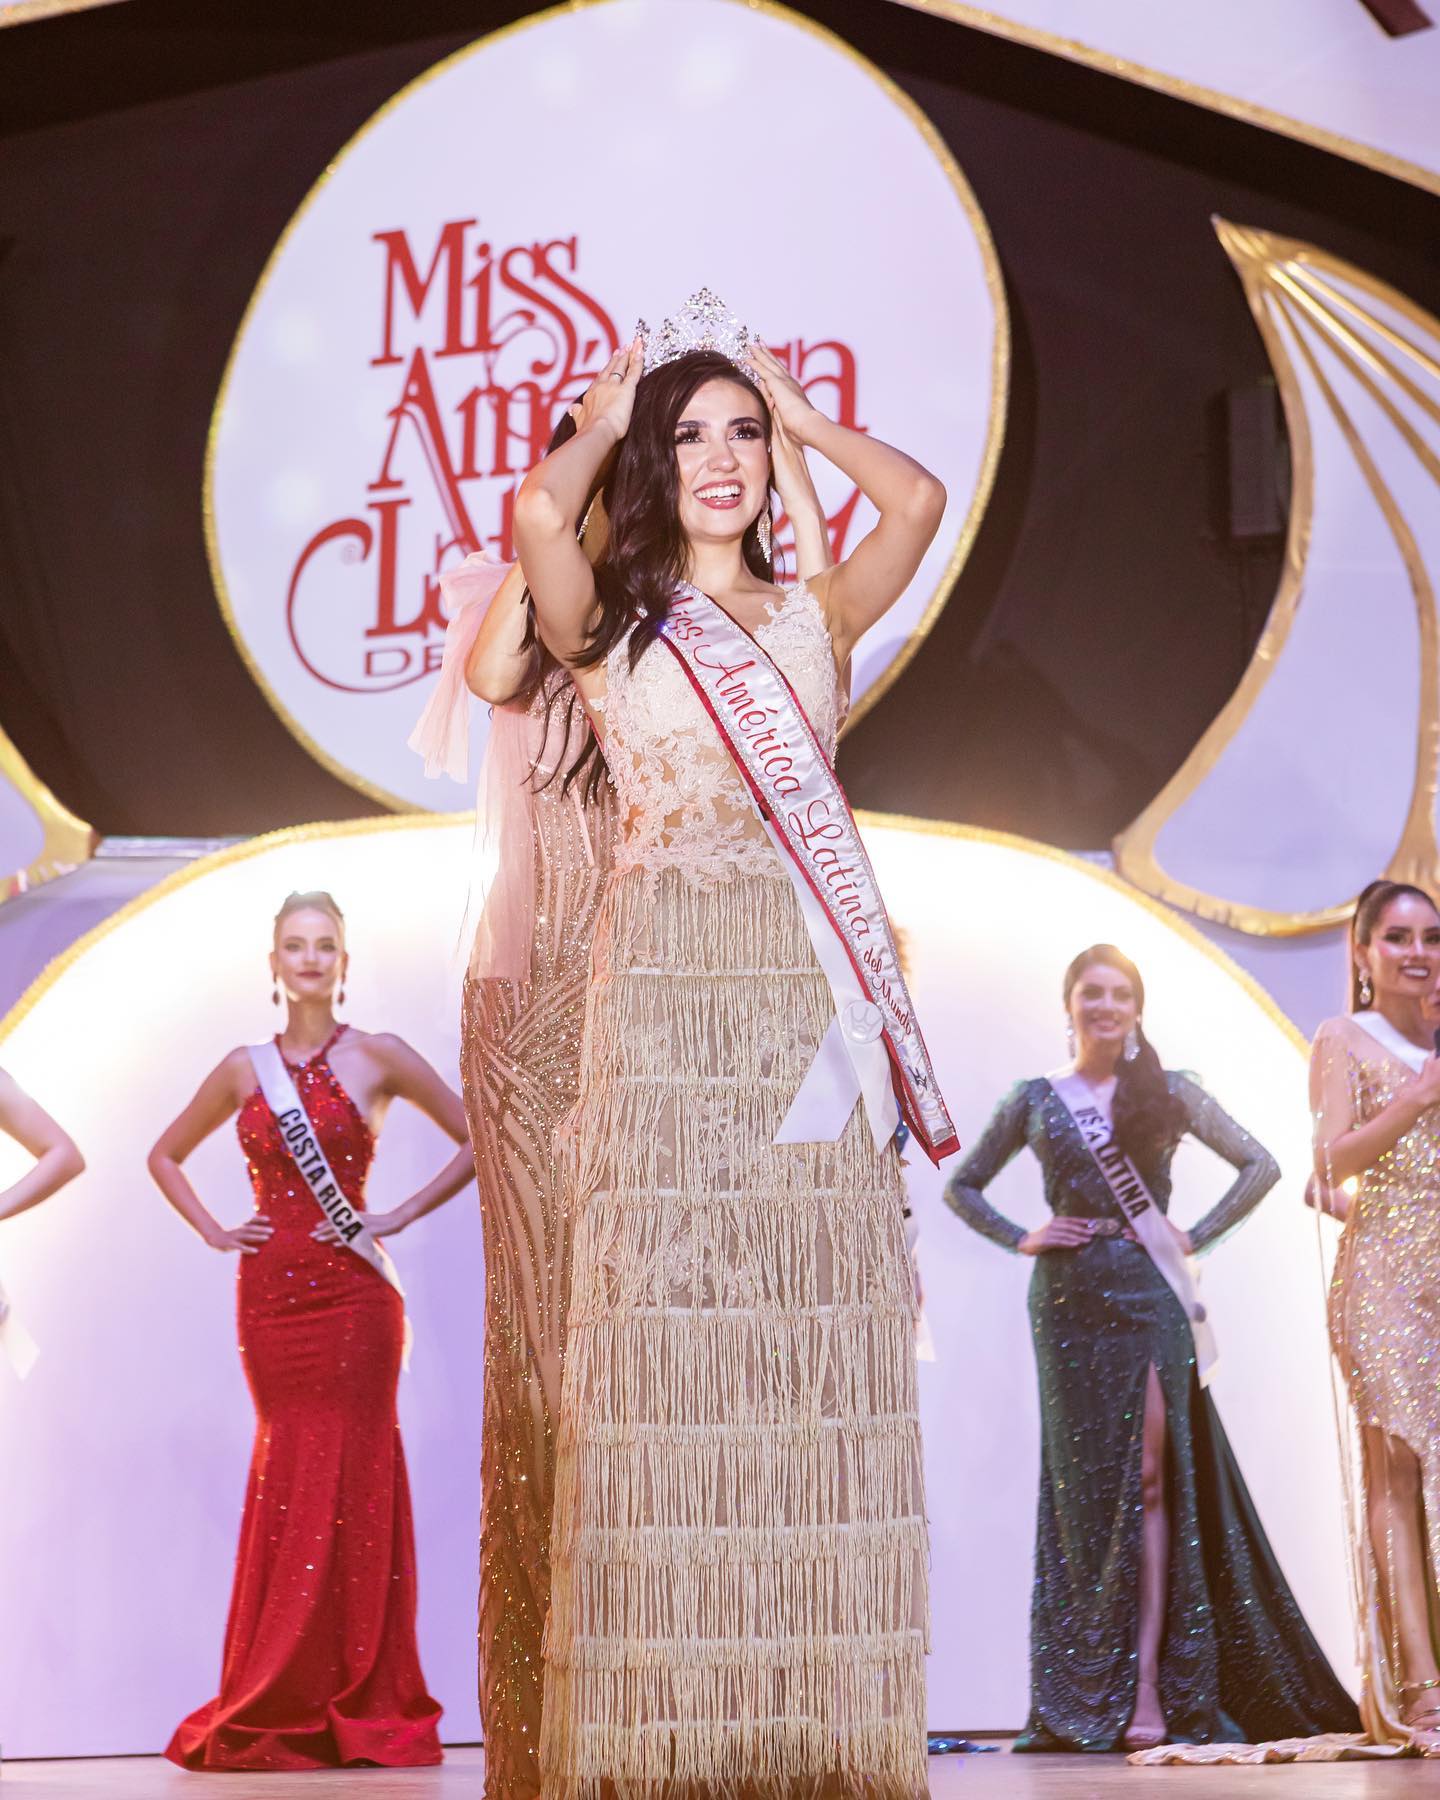 The Pageant Crown Ranking Miss Latin America Of The World 2022 Miss America Latina Del Mundo